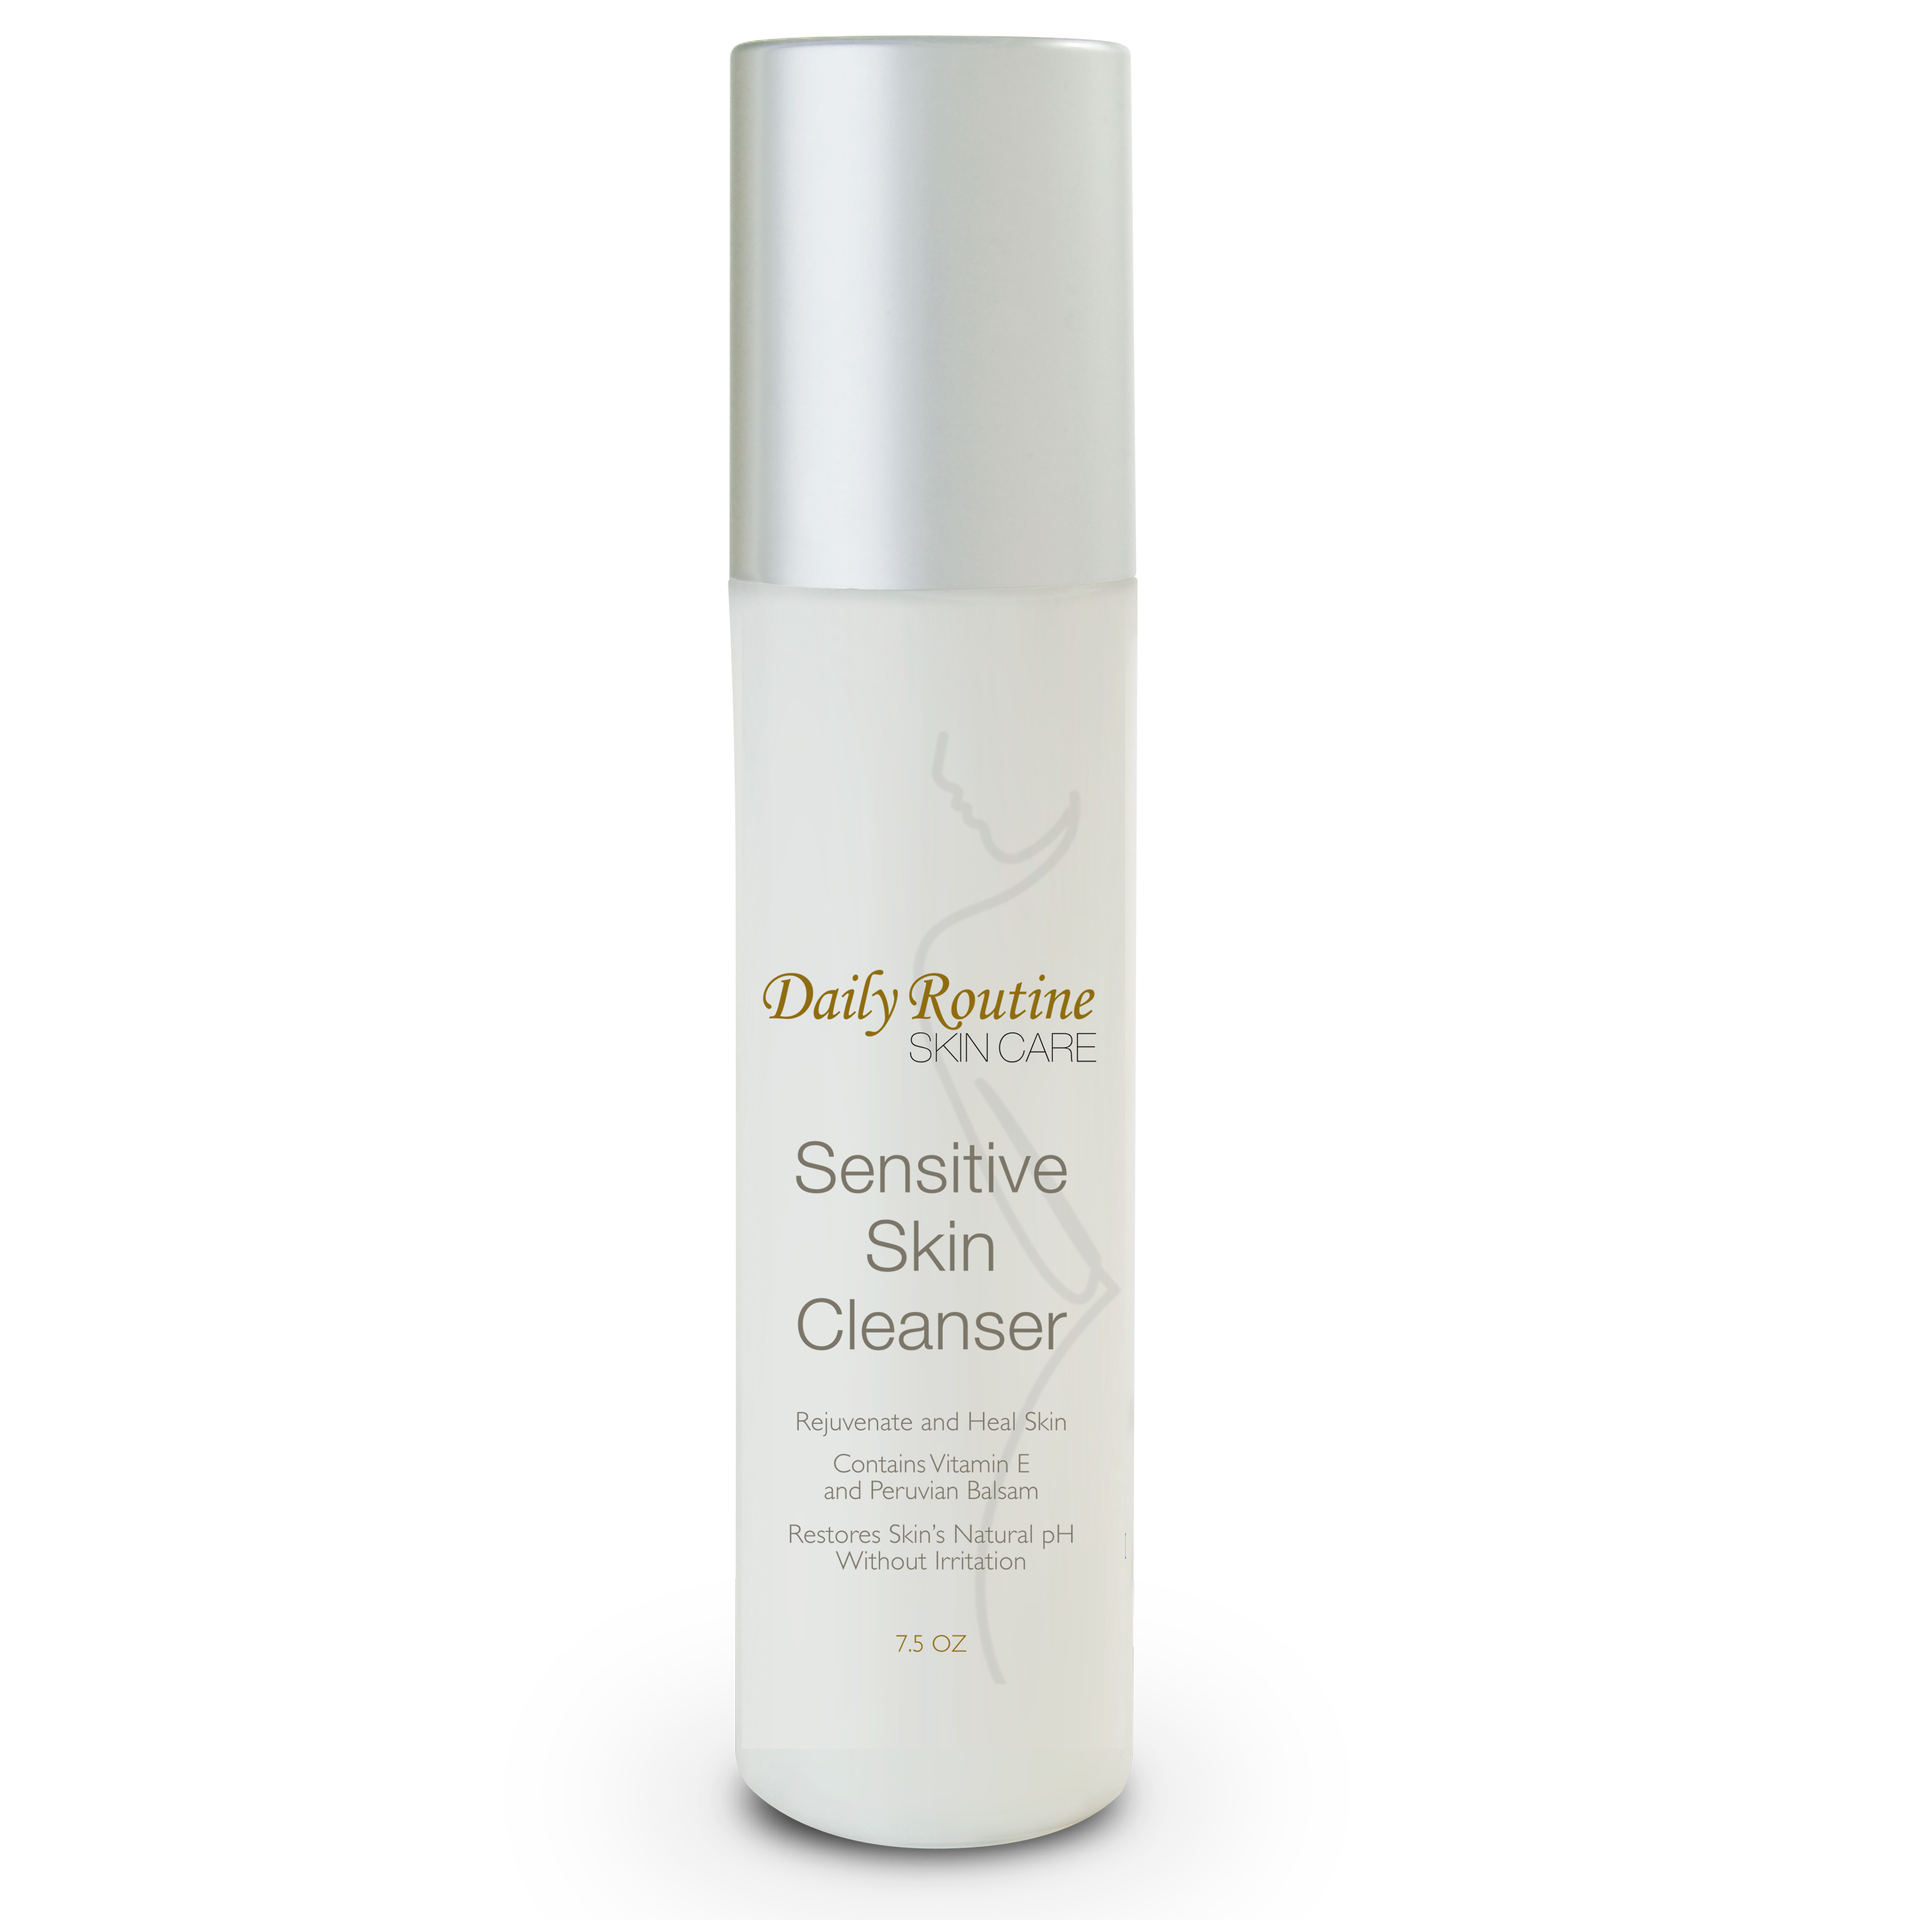 bottle of Sensitive Skin Cleanser by Daily Routine Skin Care